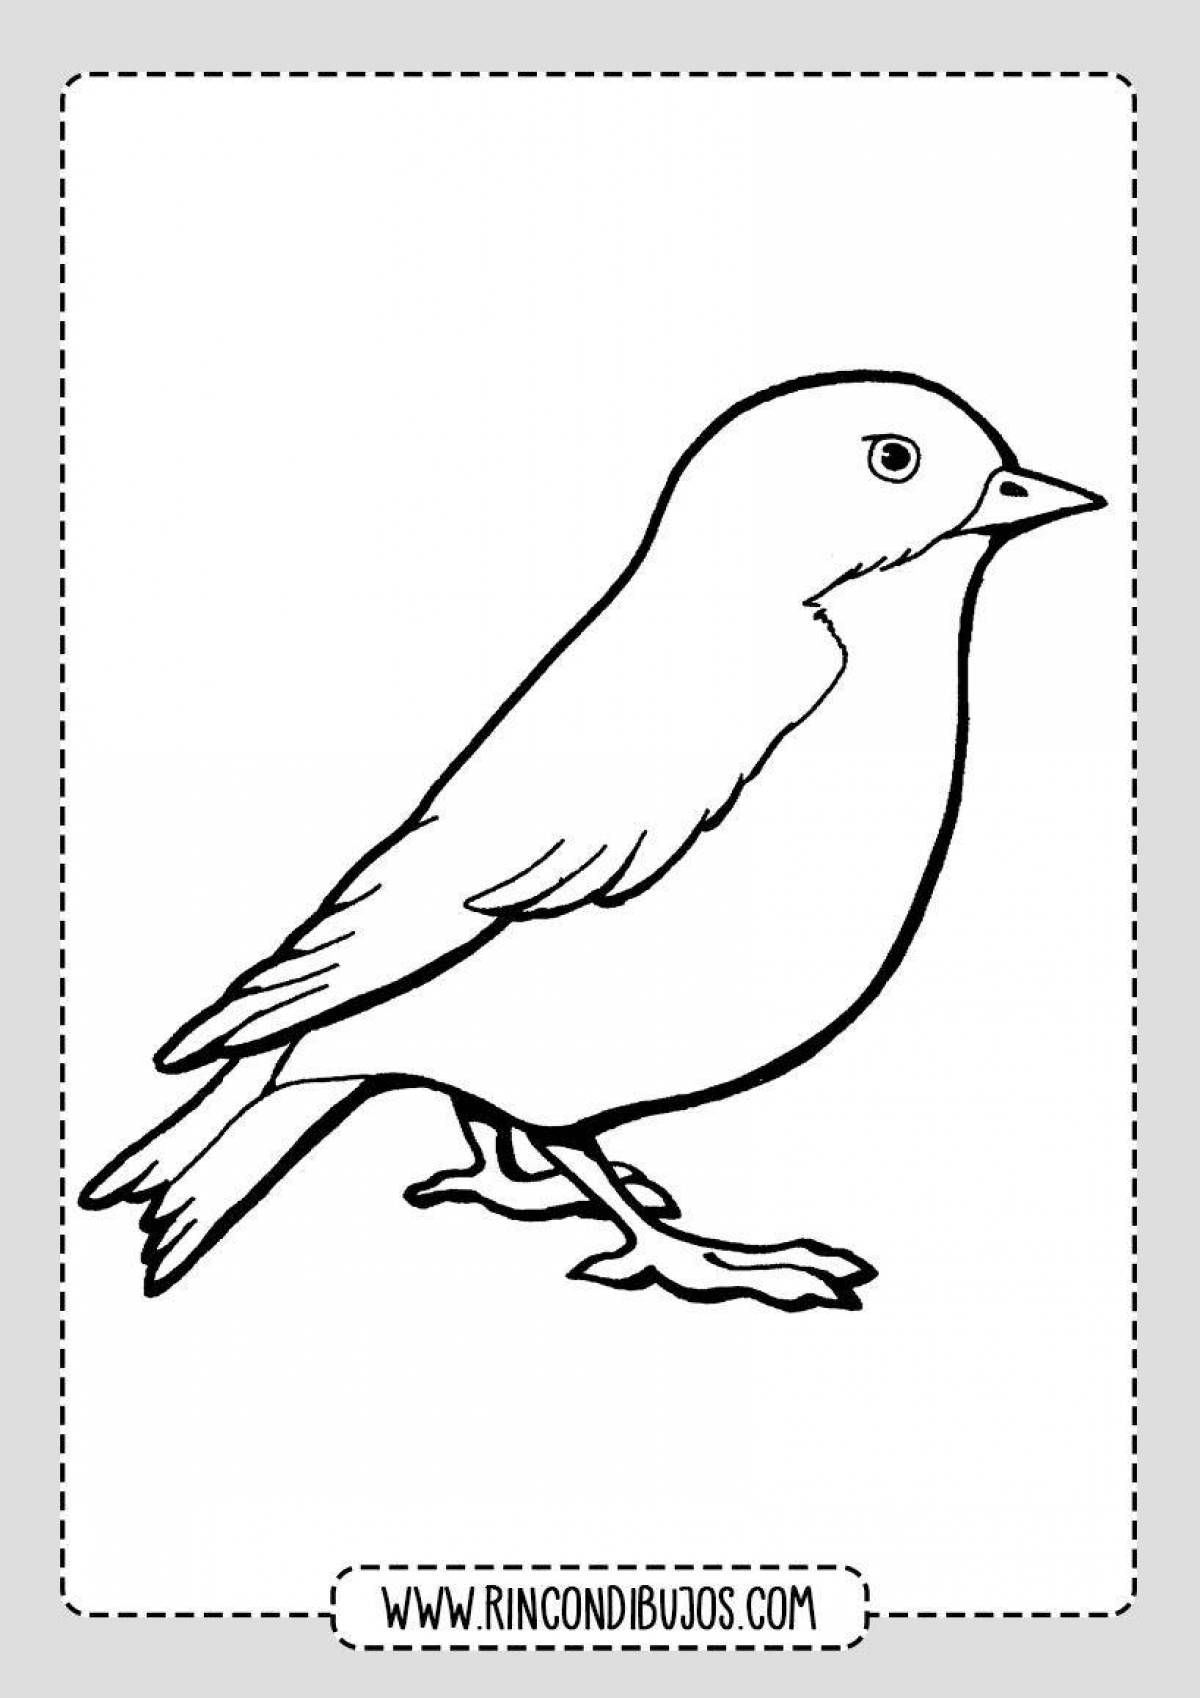 Coloring book cheerful sparrow for children 2-3 years old